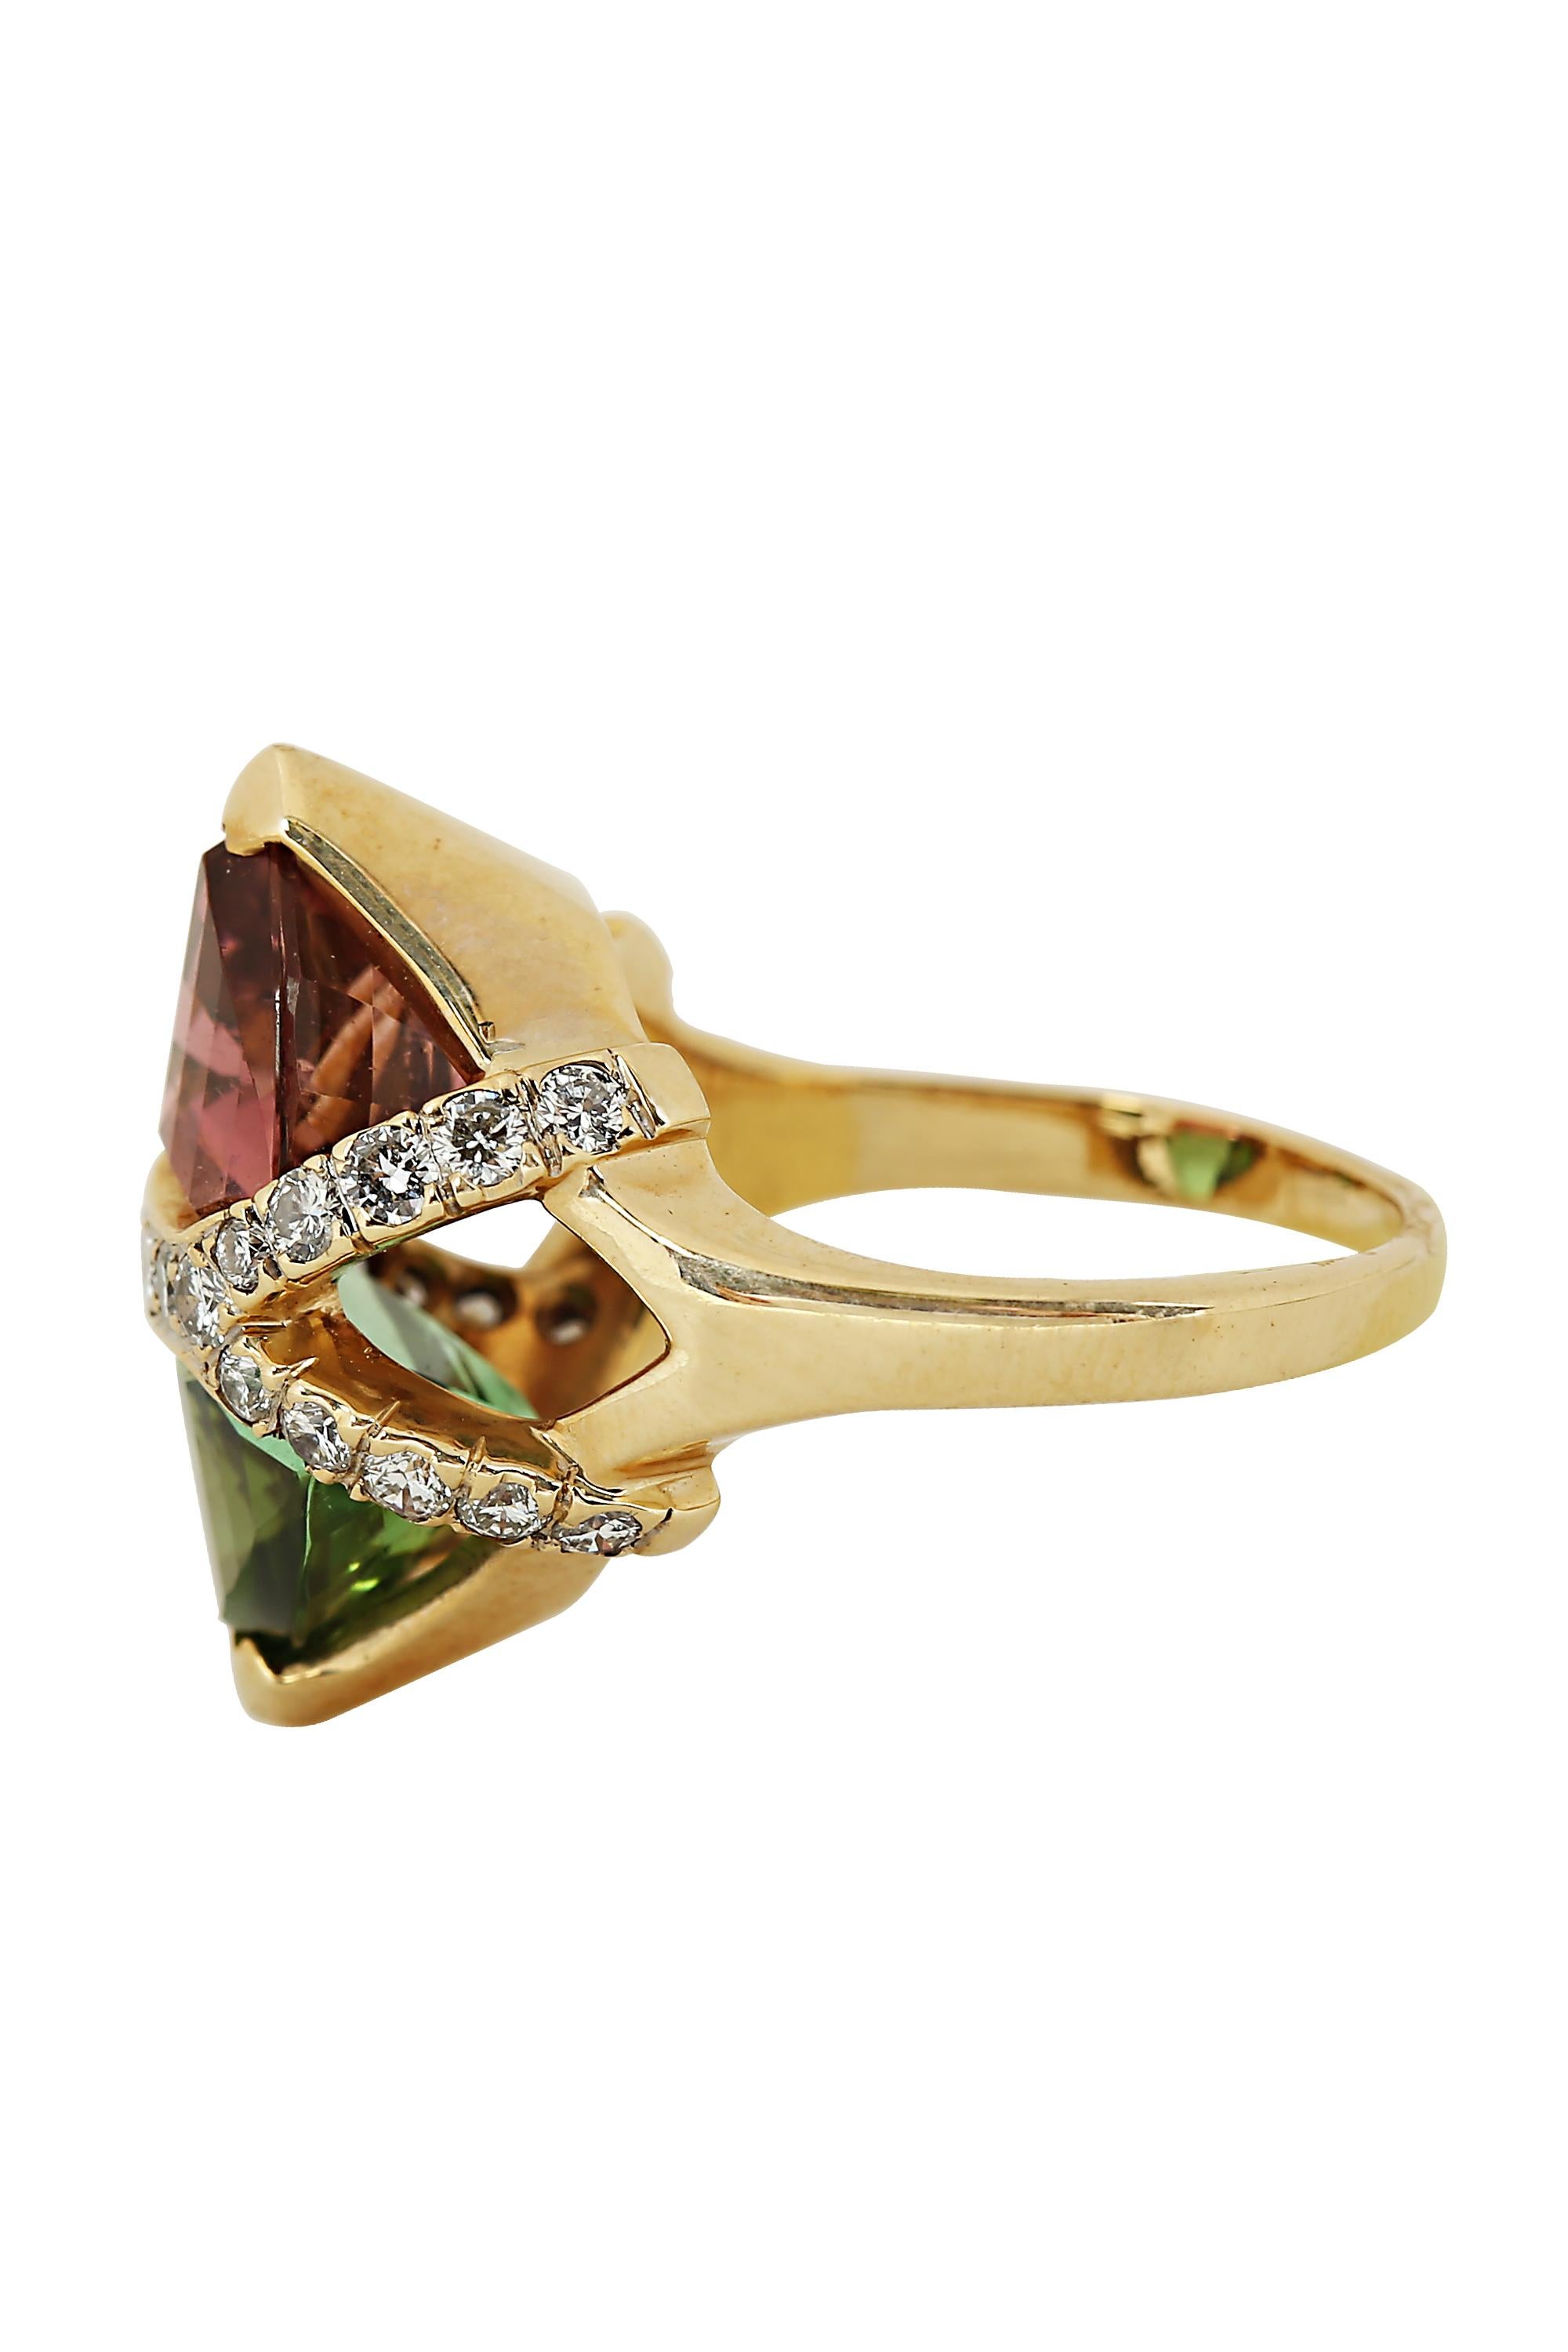 This striking ring features the winning color combination of pink and green tourmalines bisected by a bright row of diamonds terminating in twin chevrons. Crafted in 14 karat yellow gold with approximately 10 carats of shield shaped tourmalines and